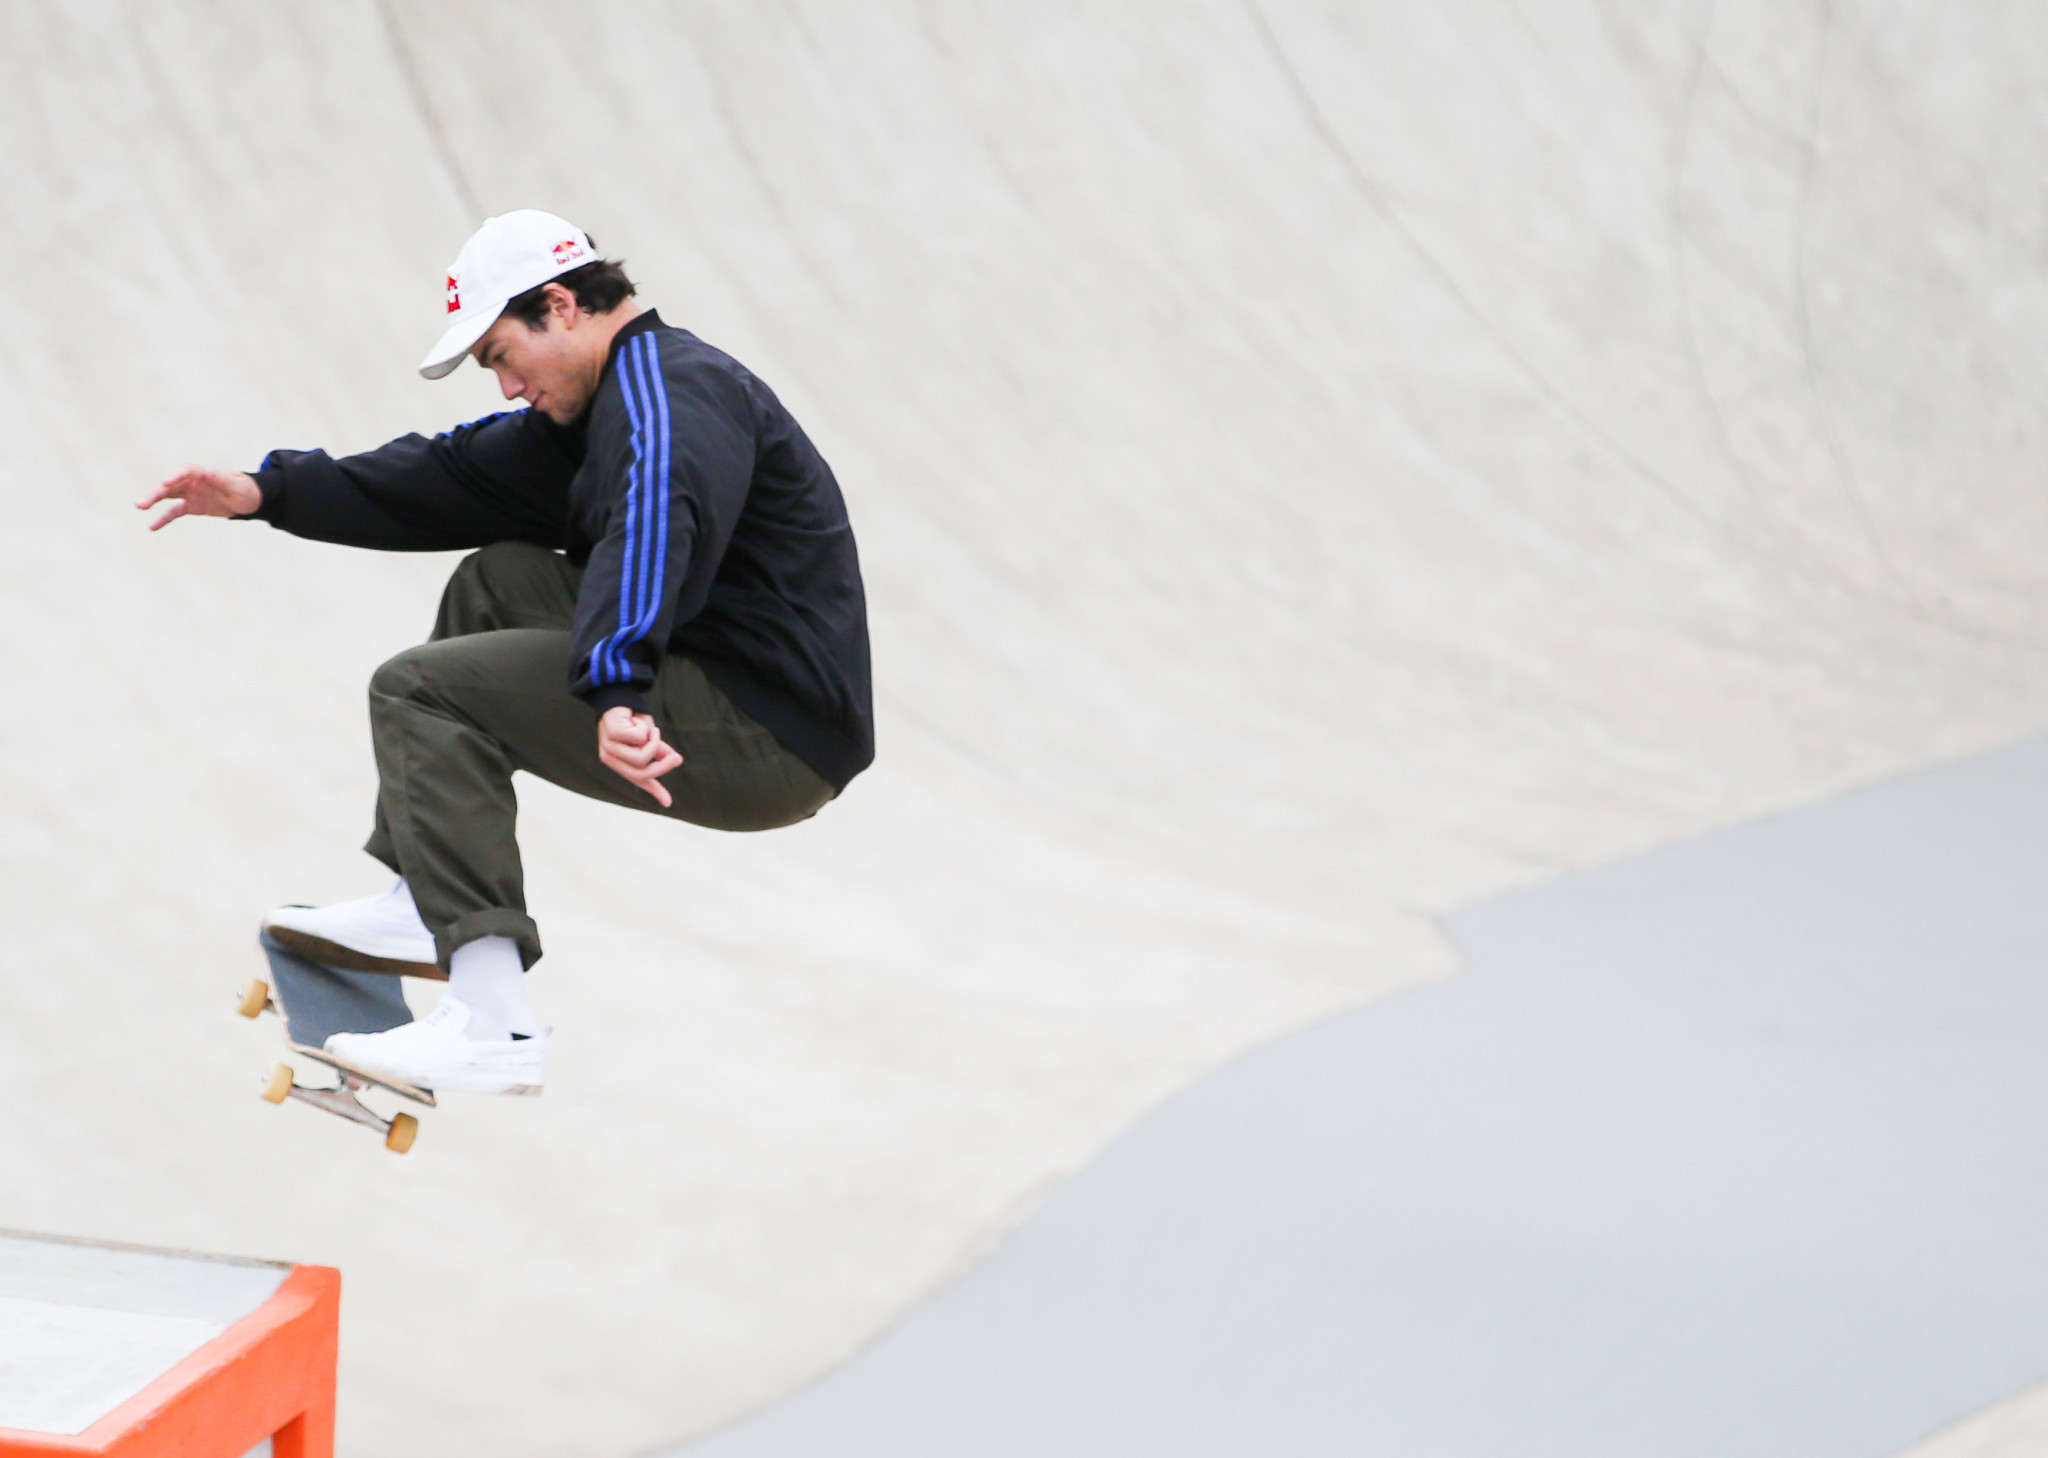 Jagger Eaton topped the men's qualifying round at the World Park Skateboarding Championships ©Getty Images